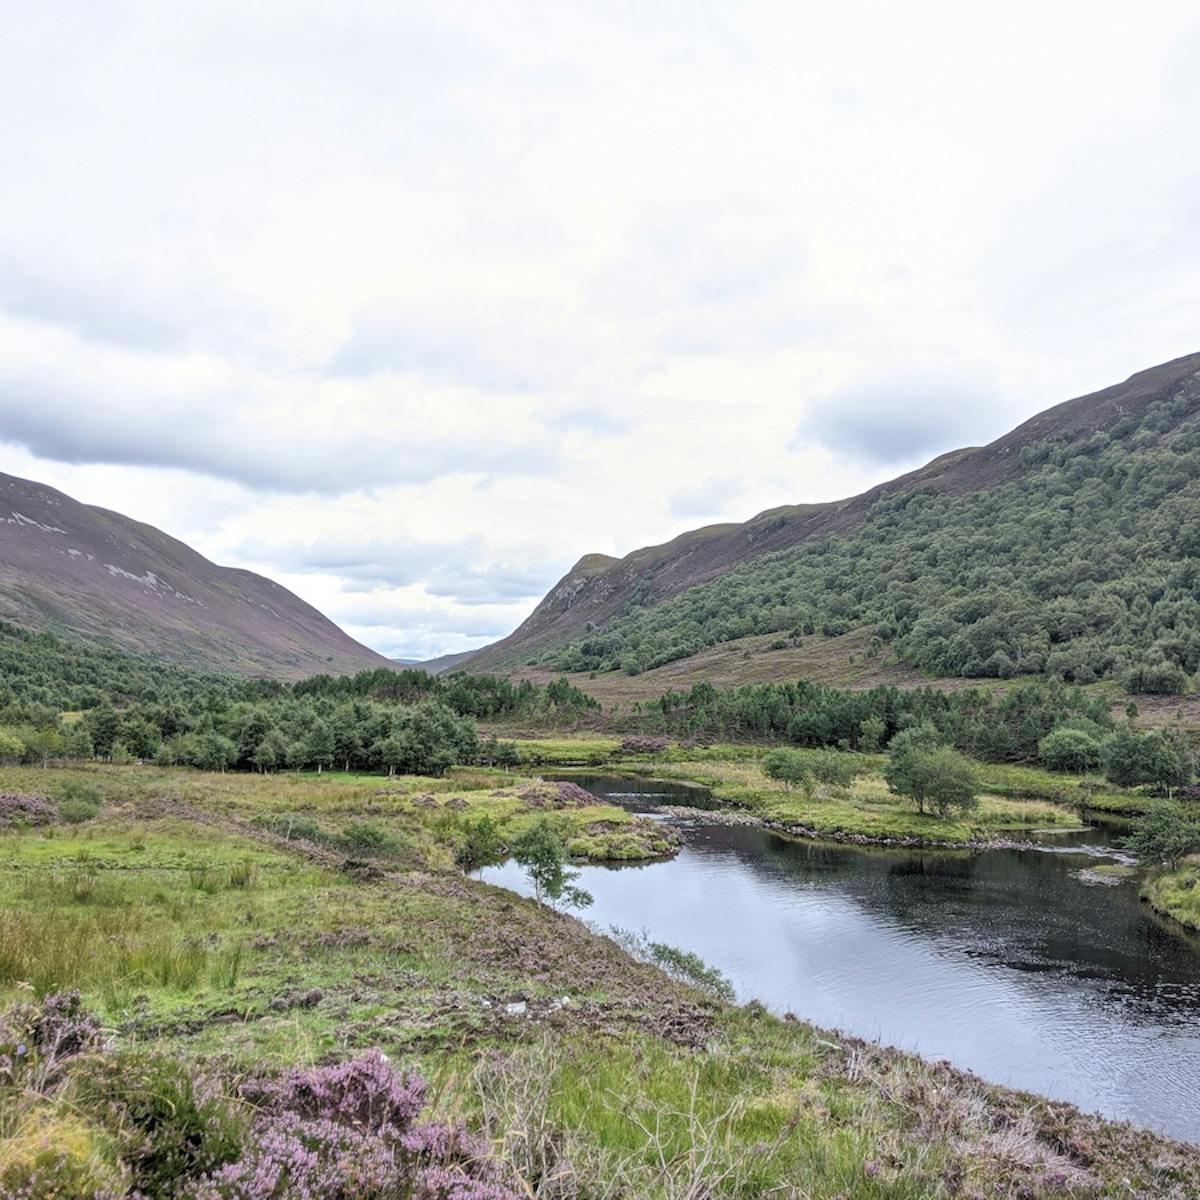 A river runs along glen mor surrounded by trees, purple heather and grass